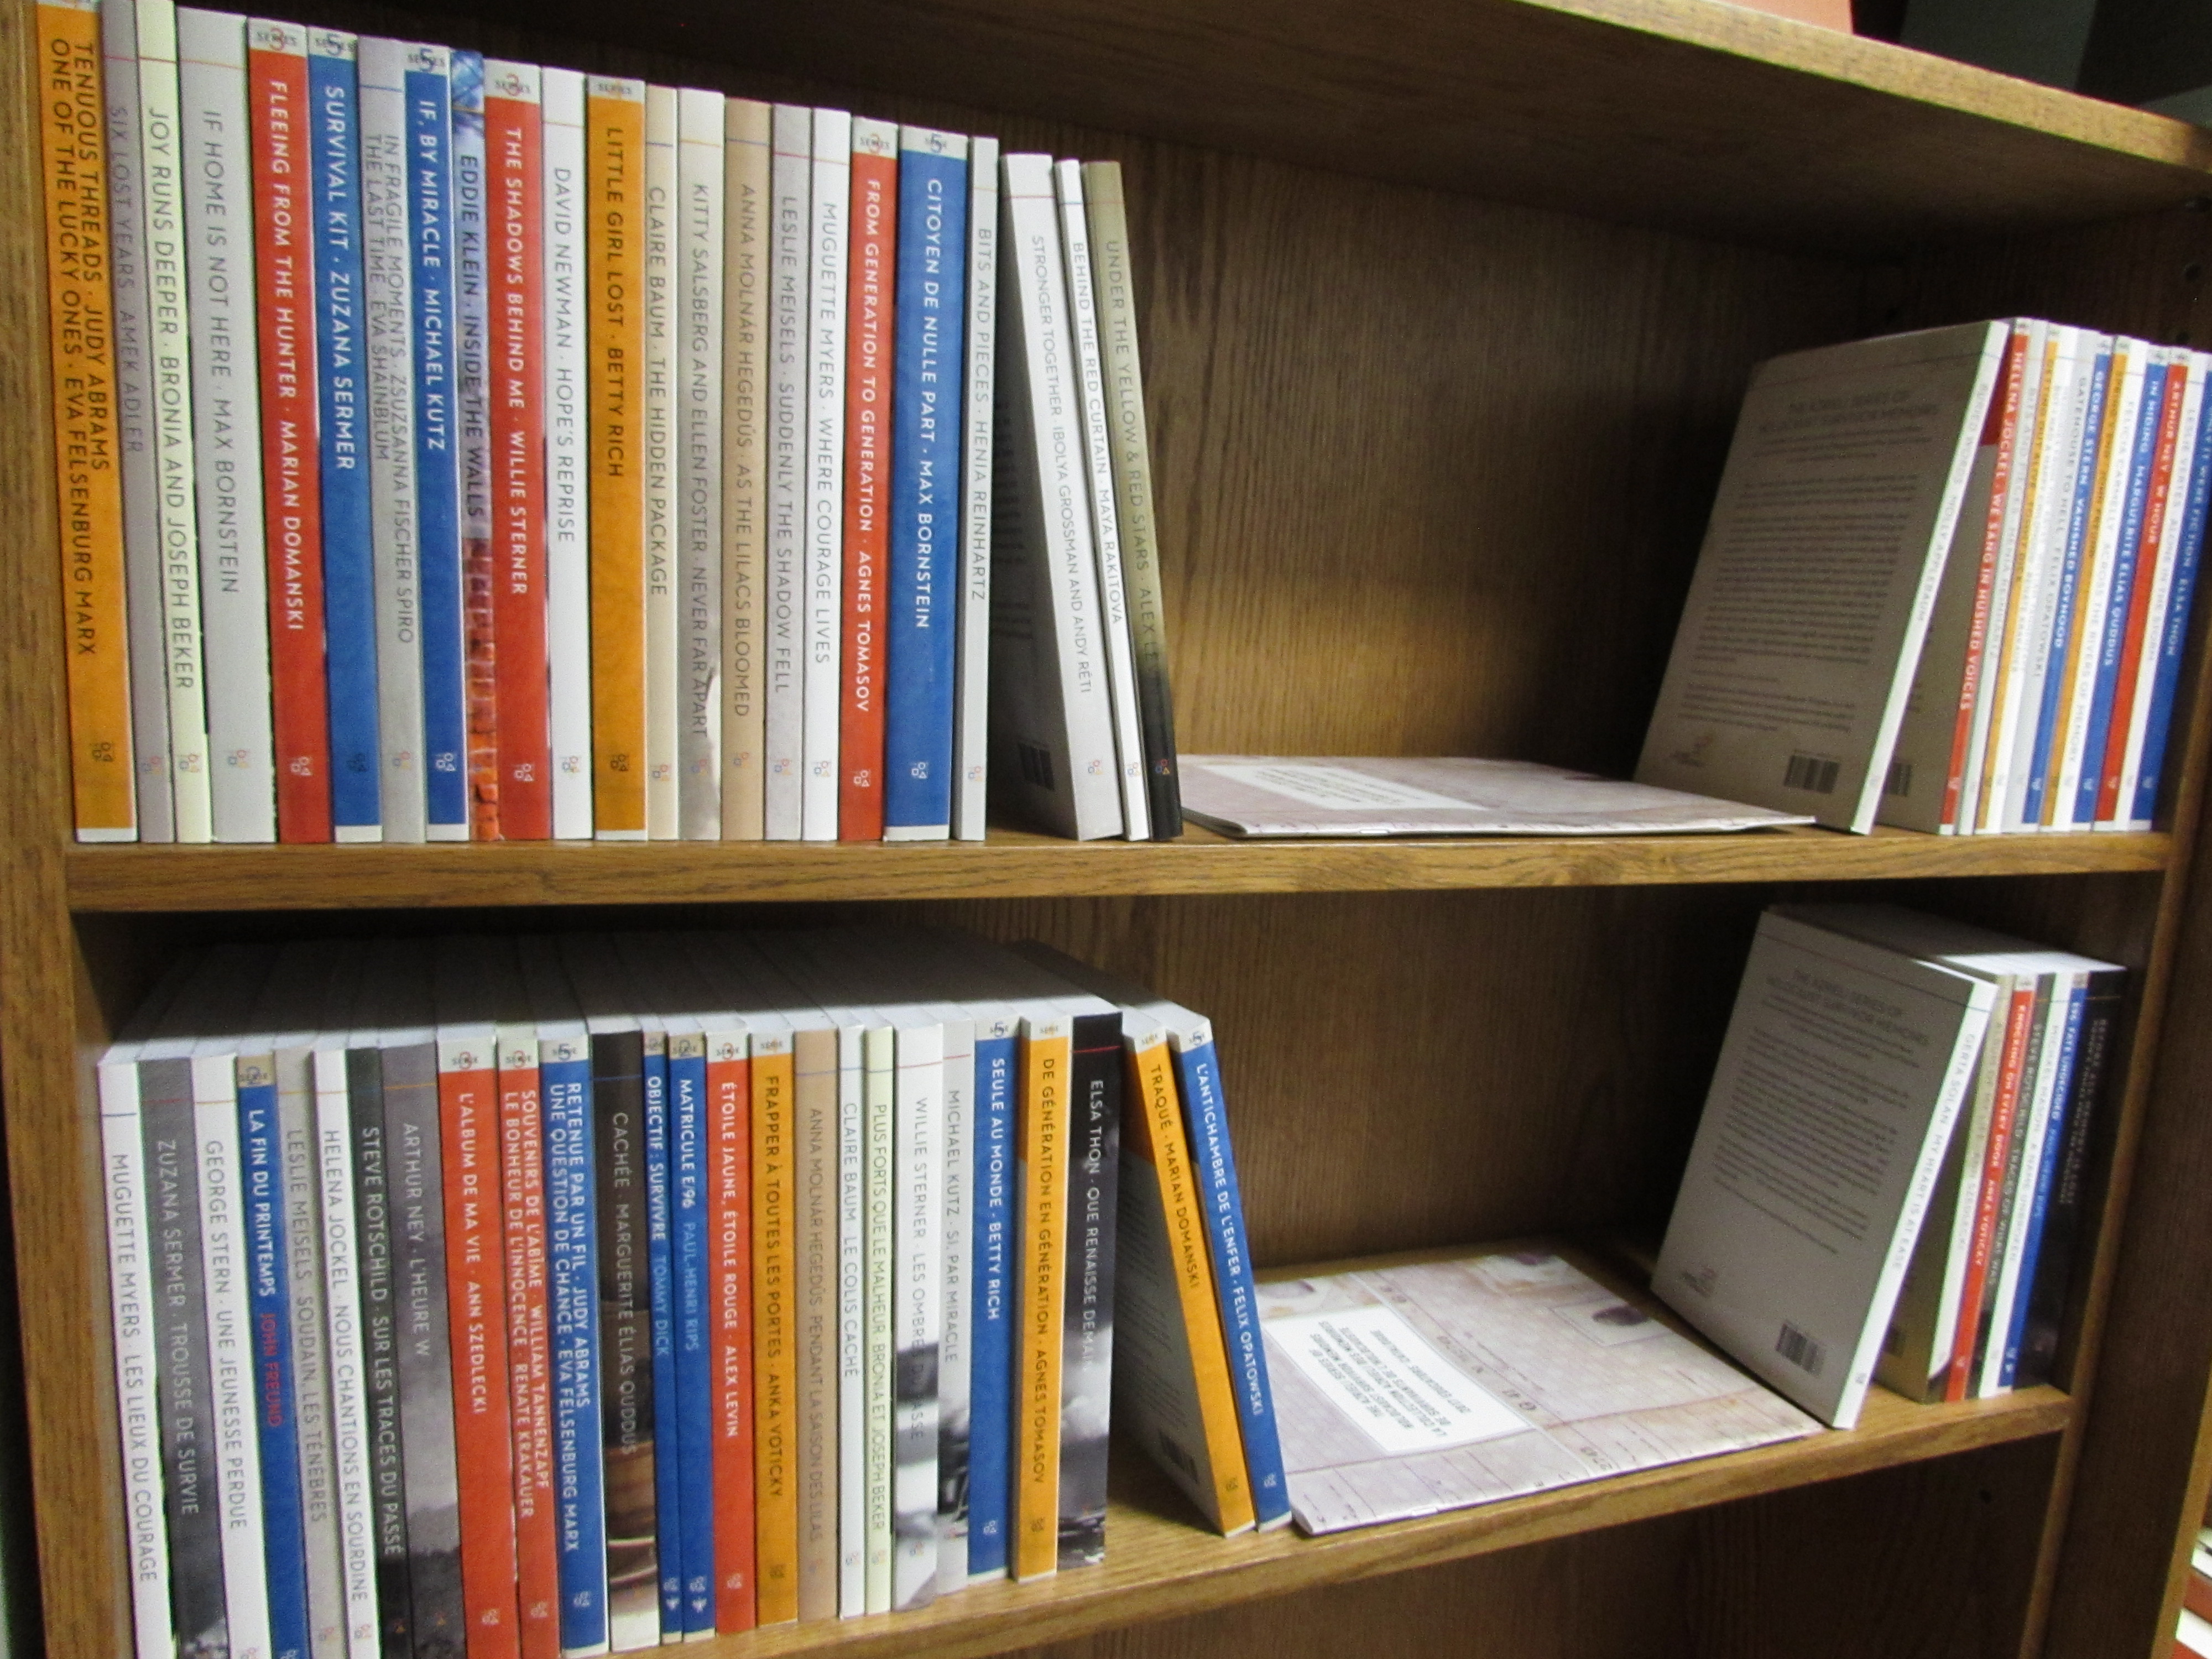 A display of books in the Rudolf Vbra Holocaust Reading Room Collection.